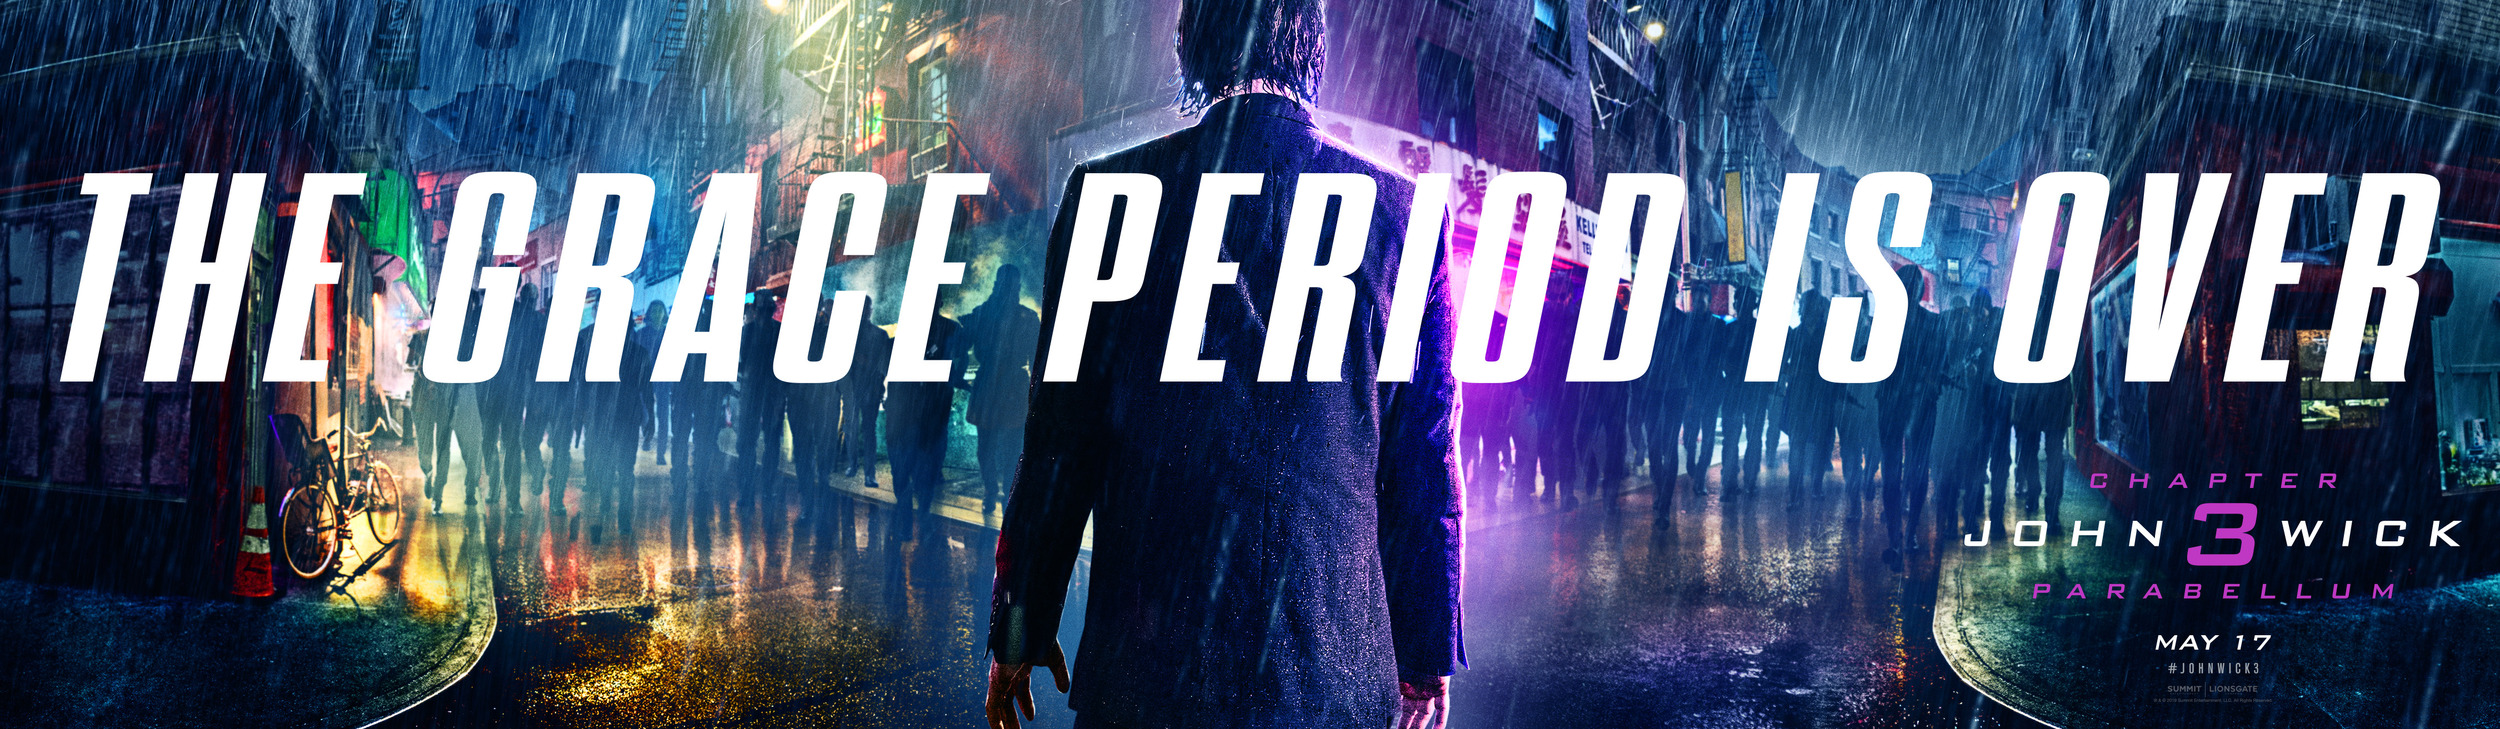 Mega Sized Movie Poster Image for John Wick: Chapter 3 - Parabellum (#3 of 27)